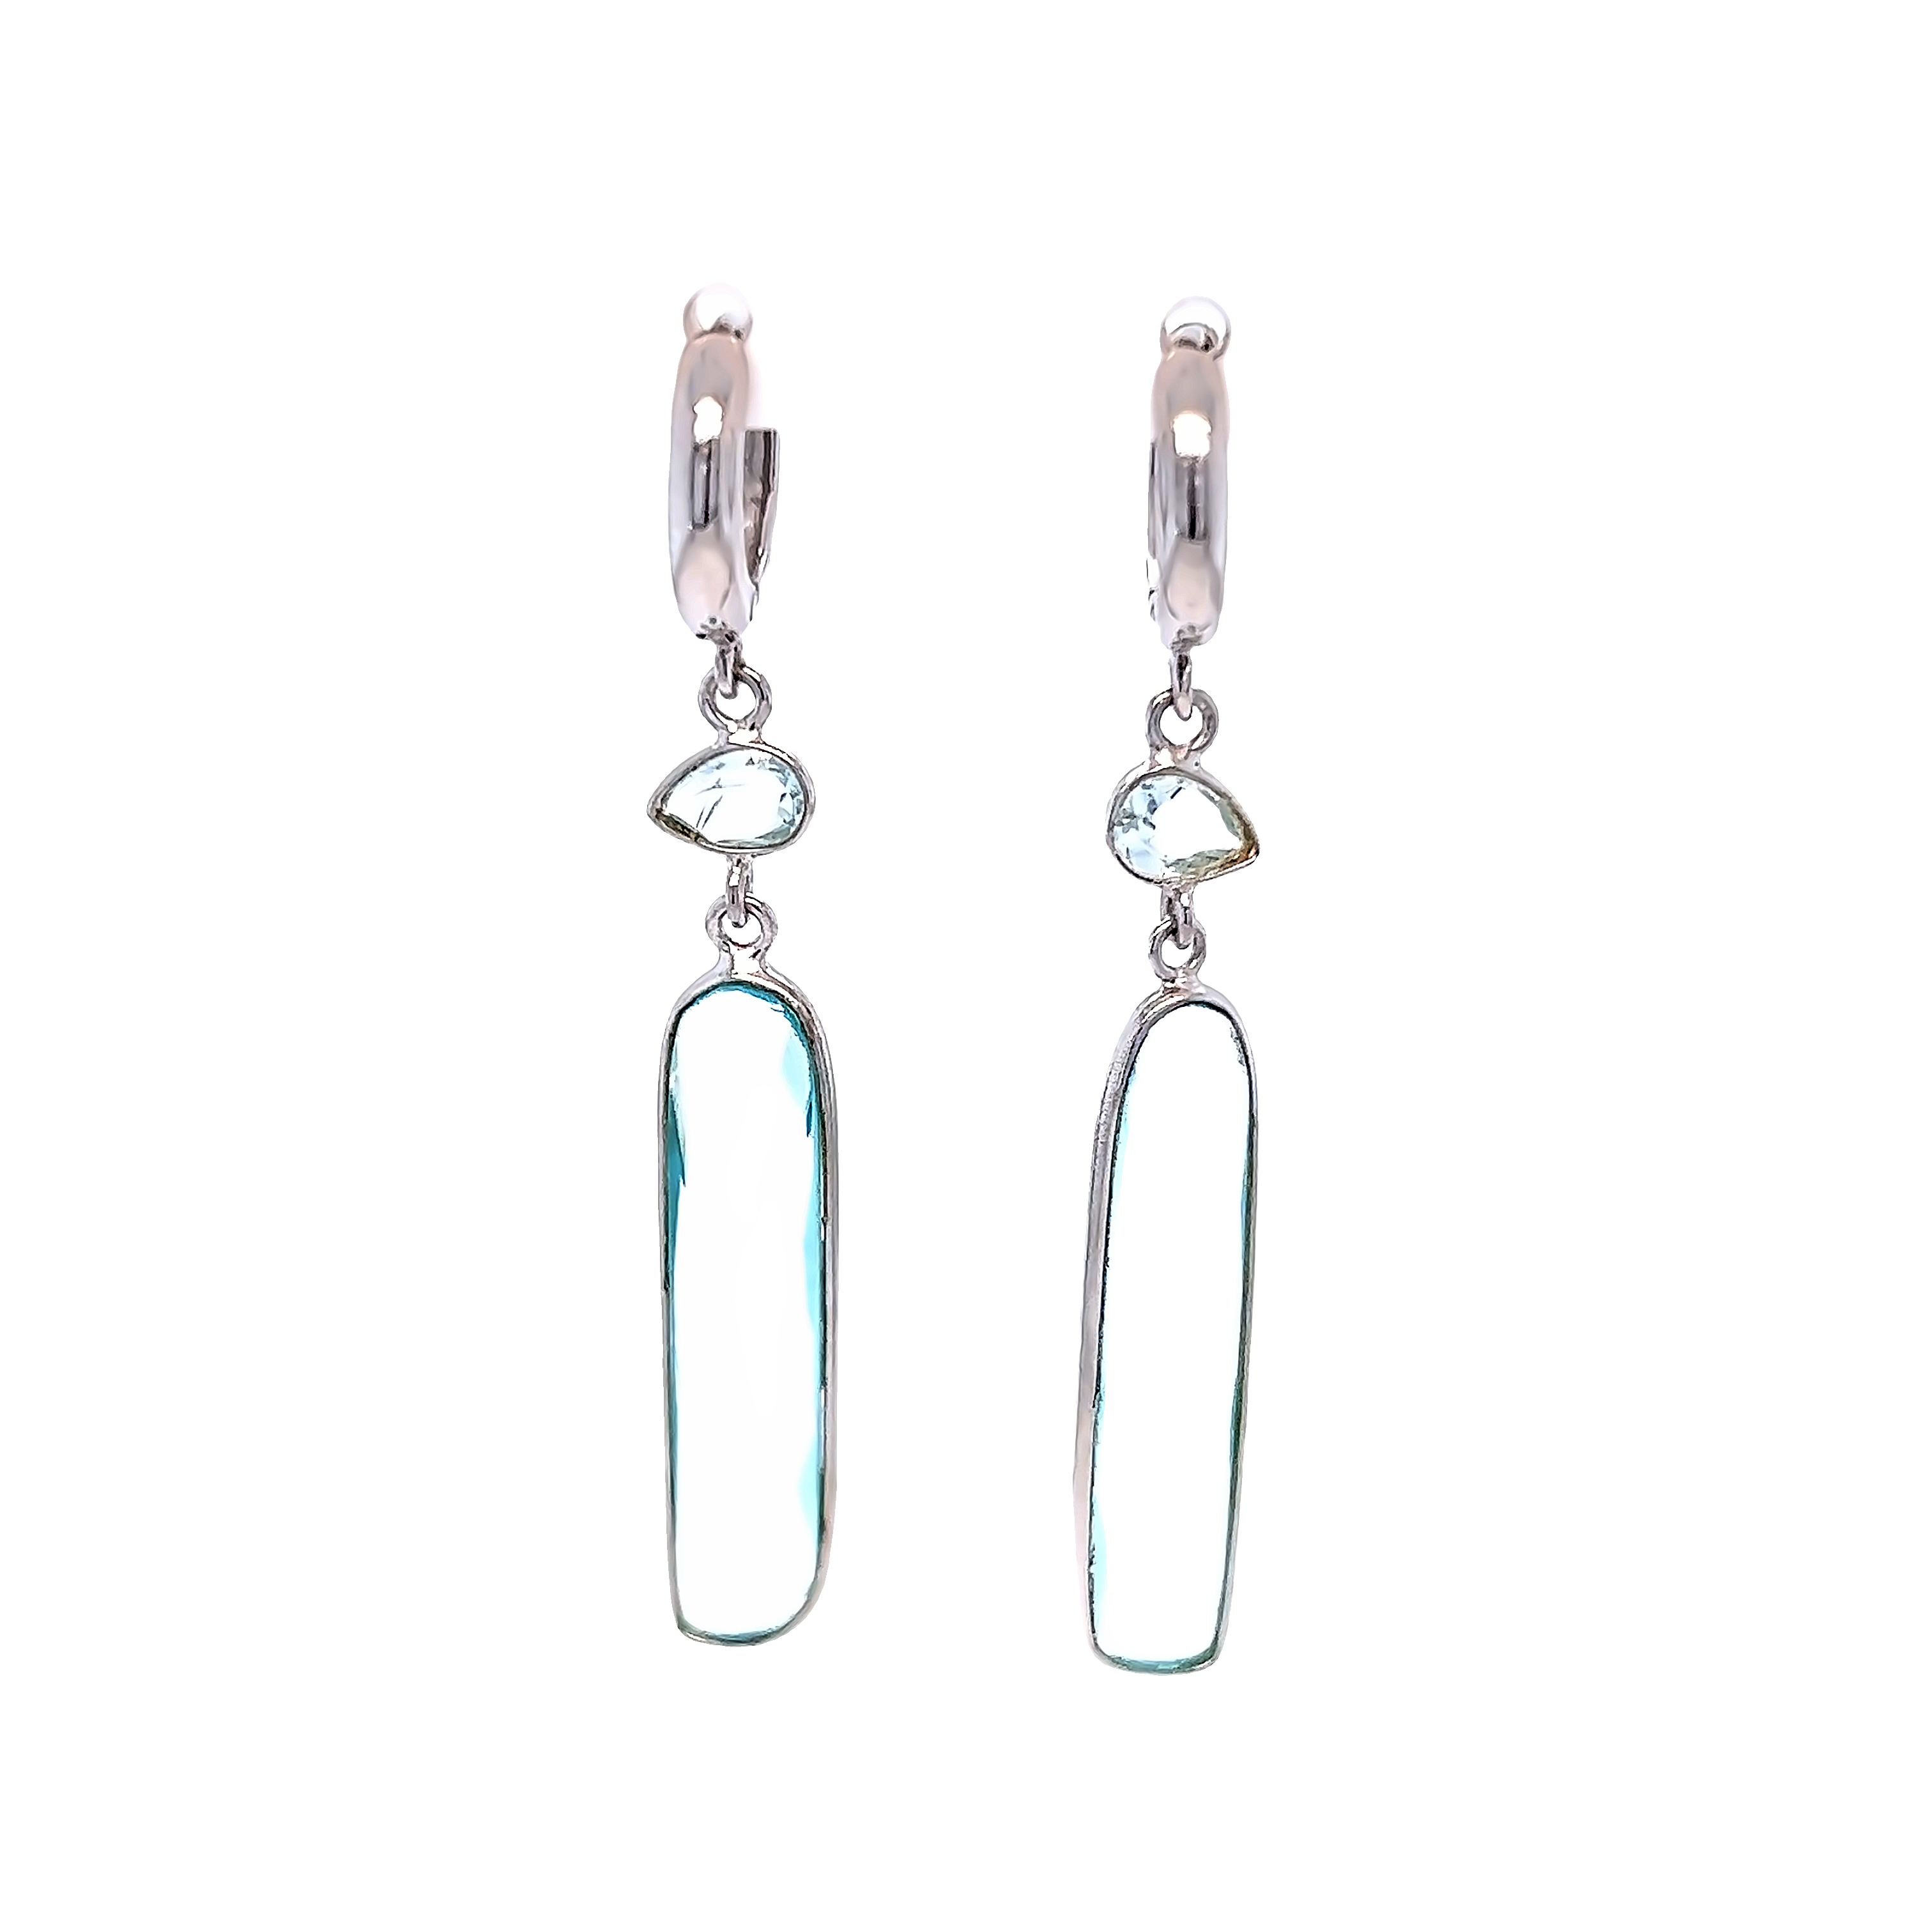 Rhodium plated sterling dangle earrings with 4 Blue Topaz